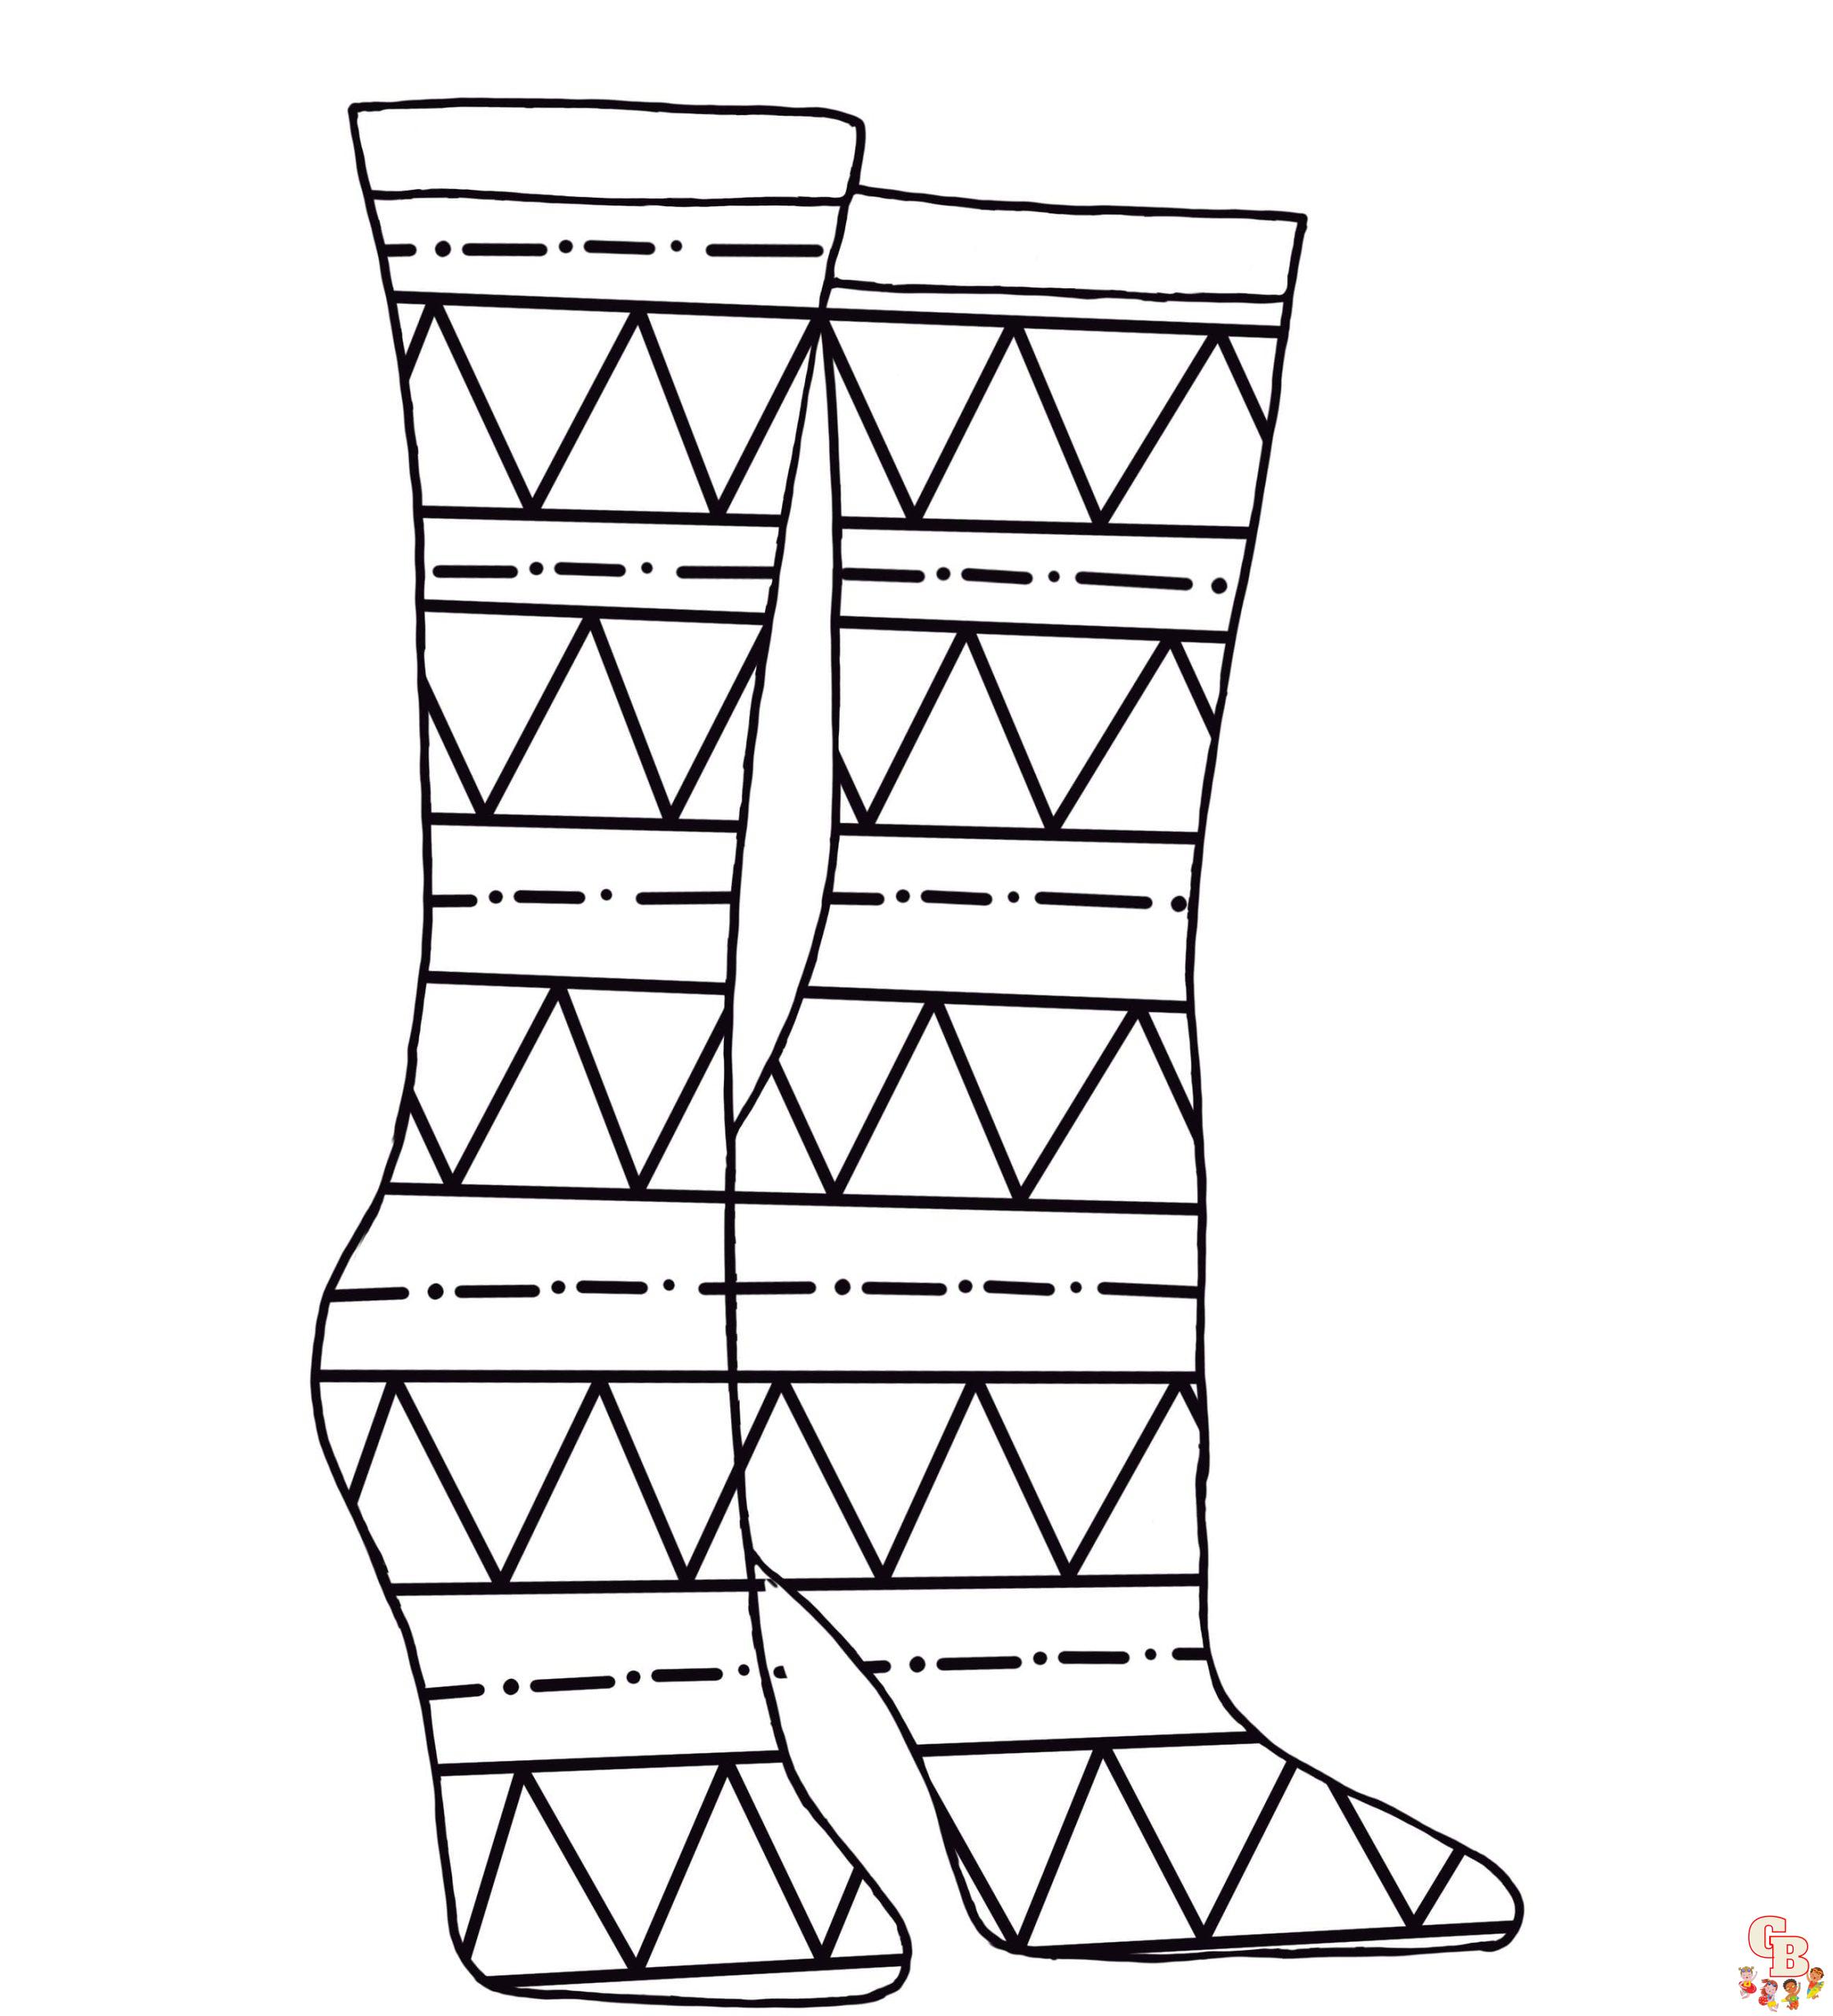 Socks Coloring Pages